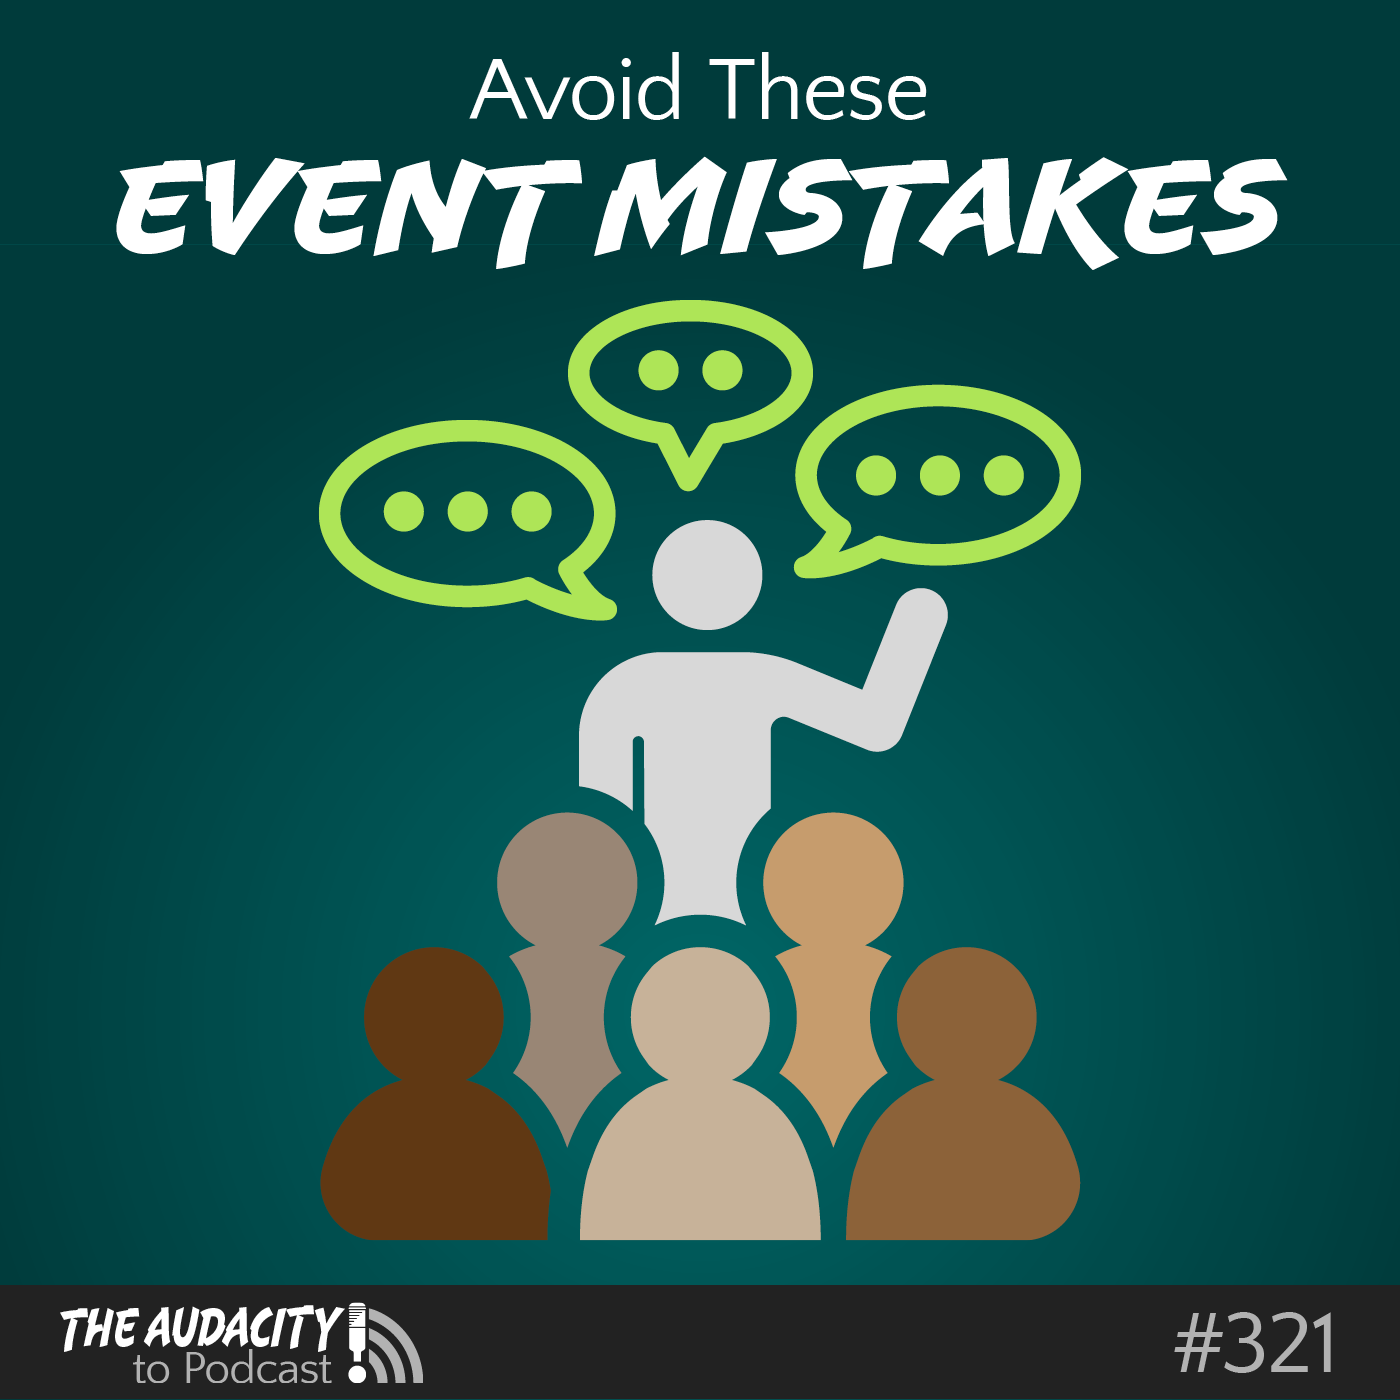 Avoid These Mistakes If You Go to Events